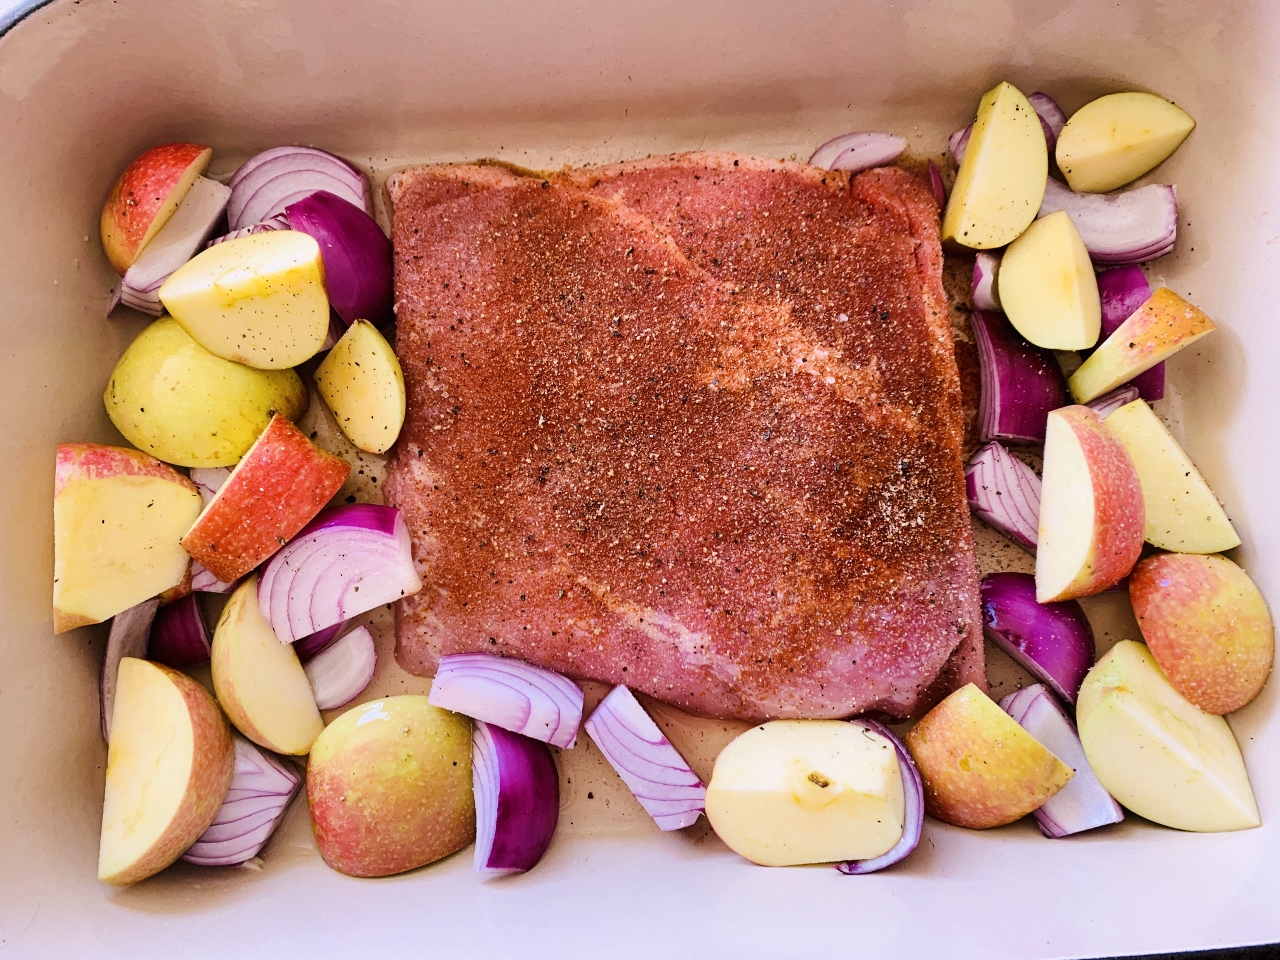 Slow-Roasted Pork Brisket with Onions & Apples – Recipe! Image 3